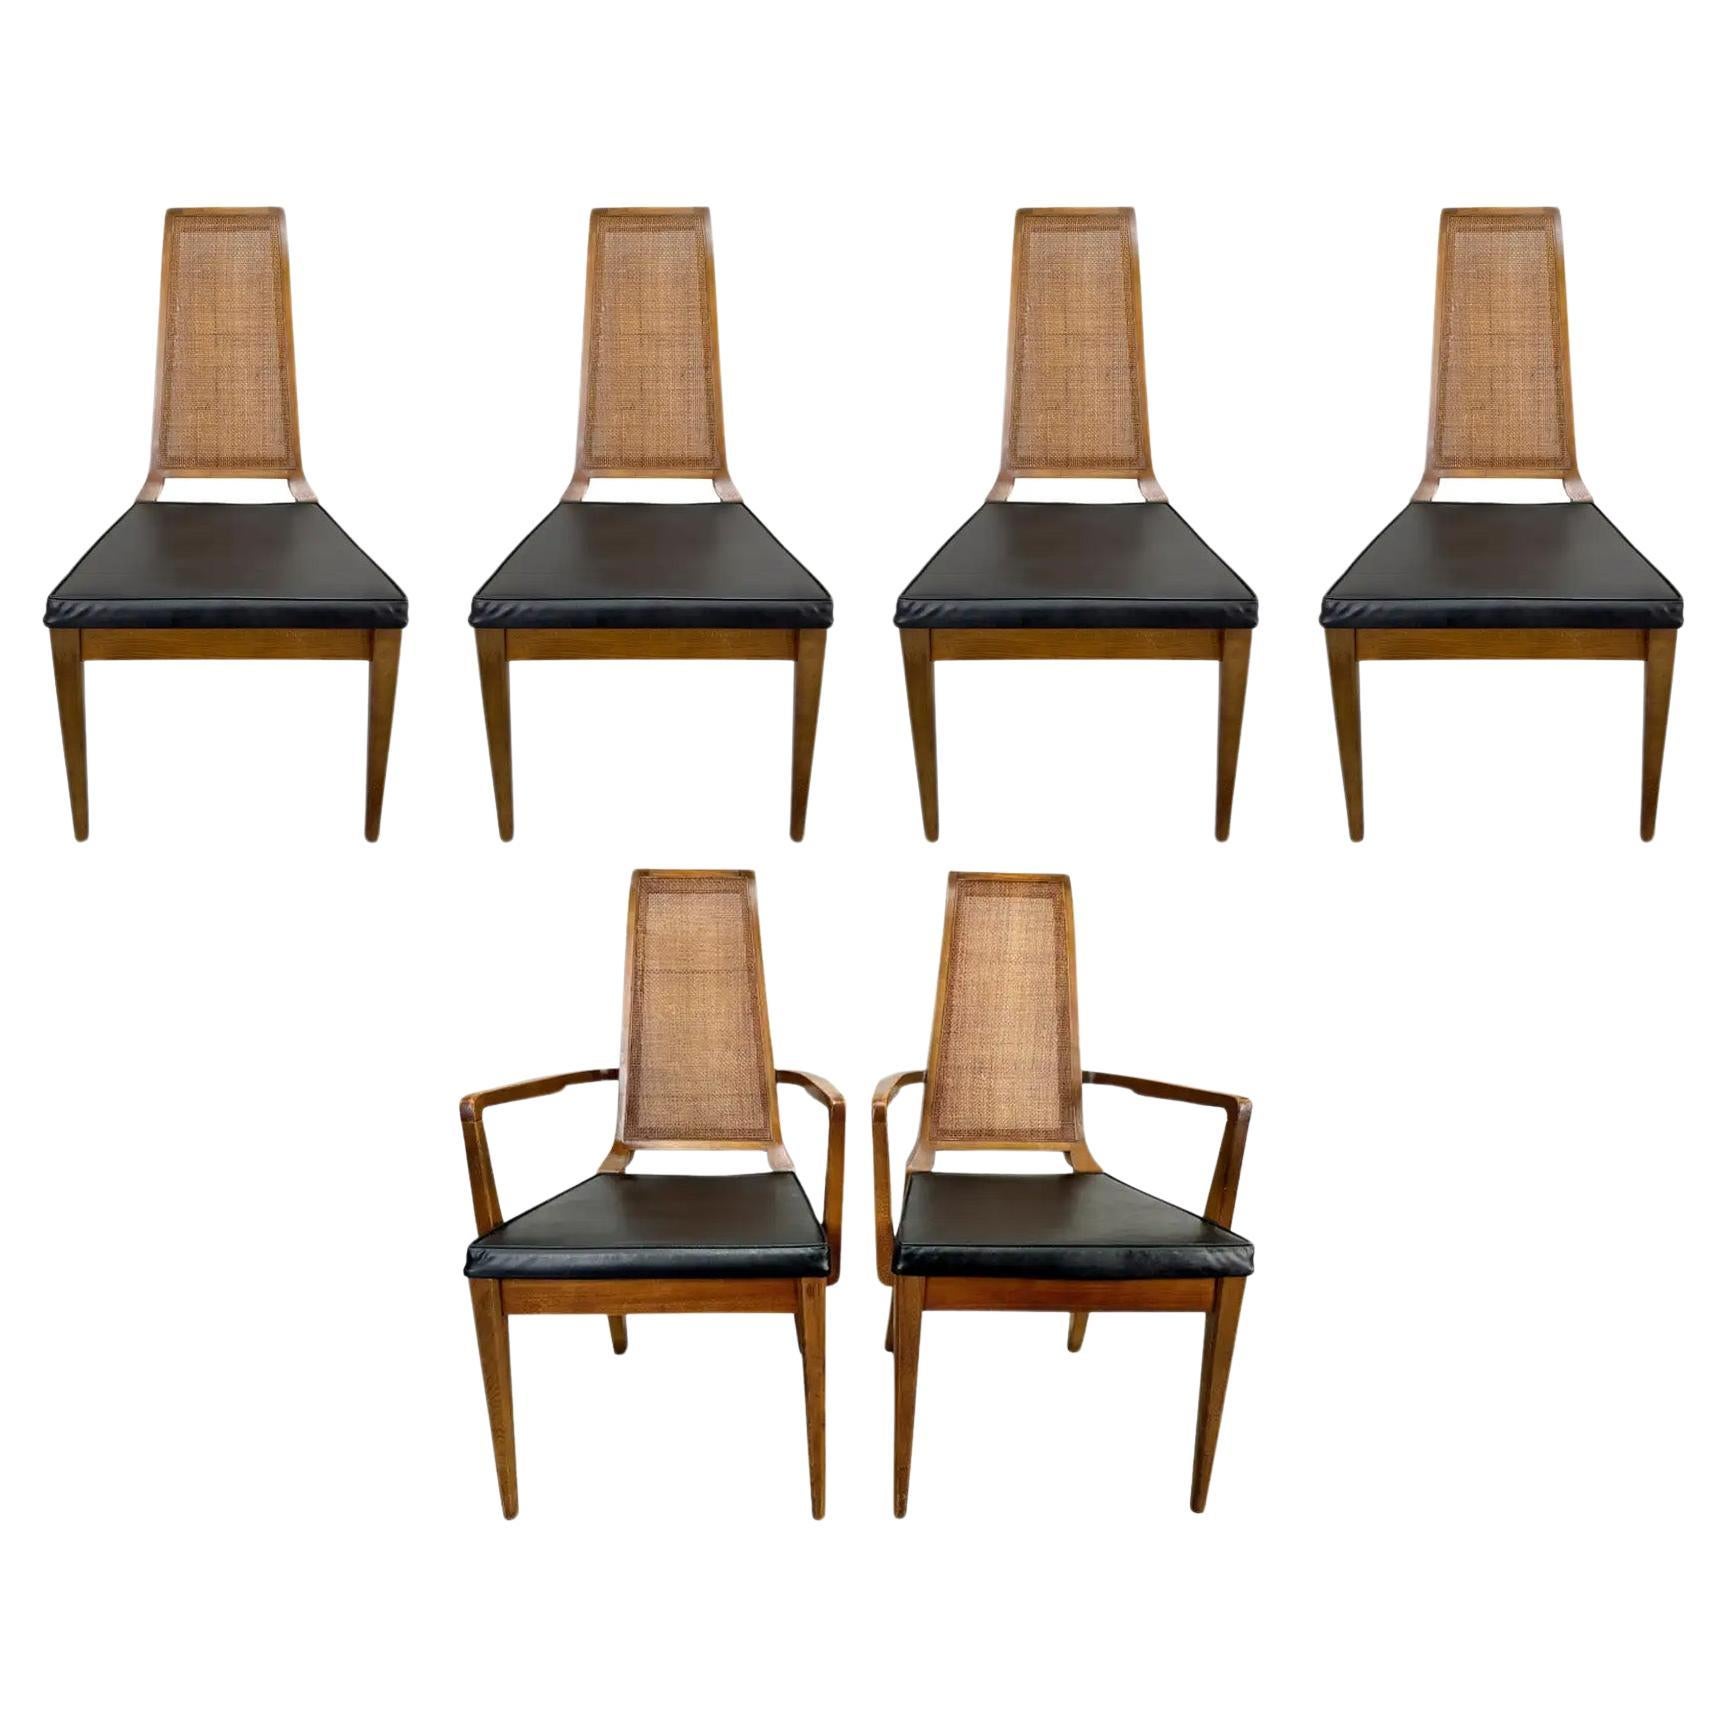 Mid Century Modern Walnut & Cane Dining Chair by American of Martinsville, 6 pcs For Sale